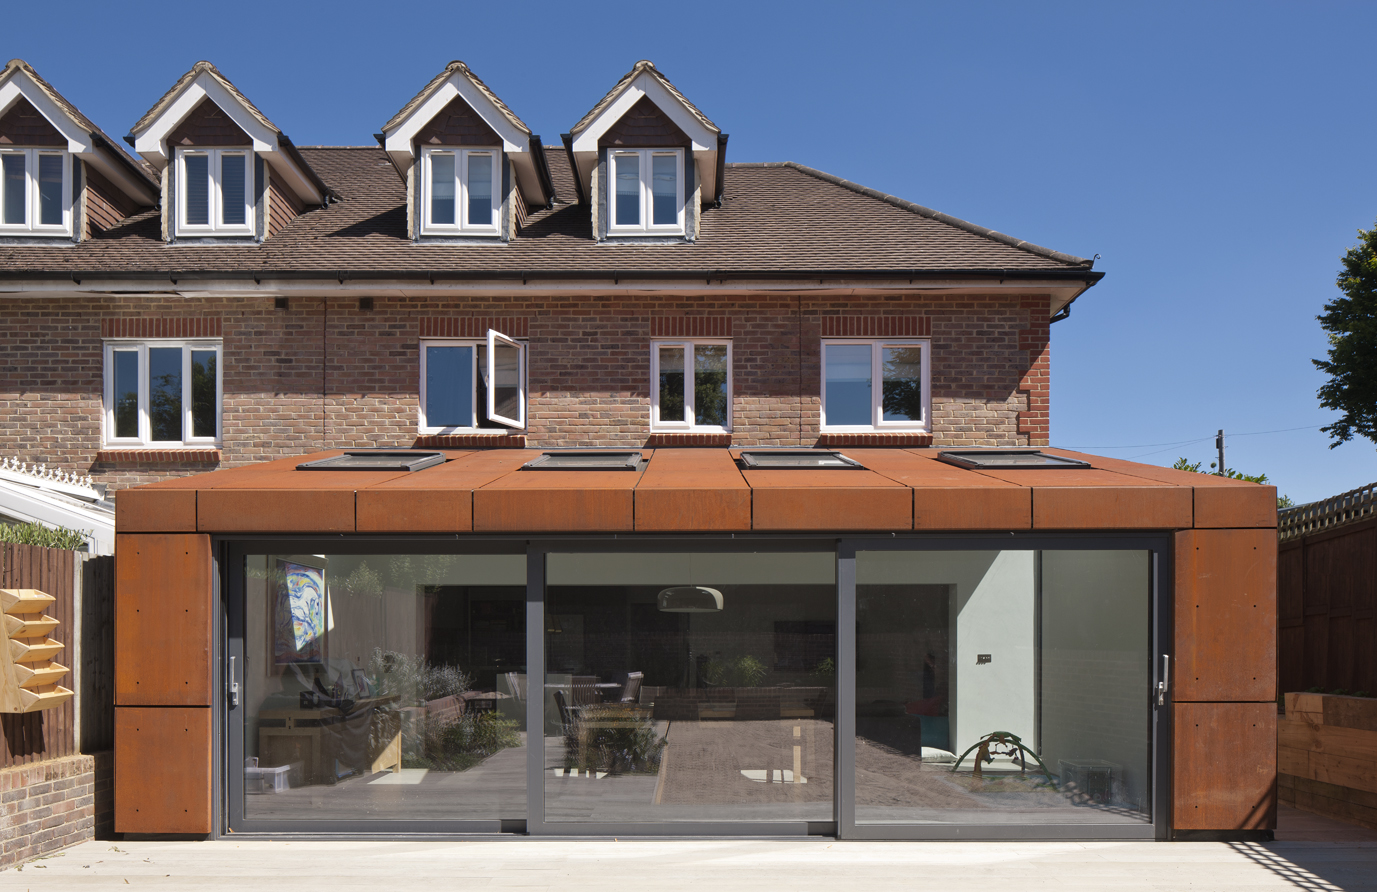 </p> <p>Find your ideal home design pro on designfor-me.com - get matched and see who's interested in your home project. Click image to see more inspiration from our design pros</p> <p>Design by Gareth, architect from Haringey, London</p> <p>#architecture #homedesign #modernhomes #homeinspiration #extensions #extensiondesign #extensioninspiration #extensionideas #houseextension #glazing #architecturalglazing #naturallight #slidingdoors </p> <p>